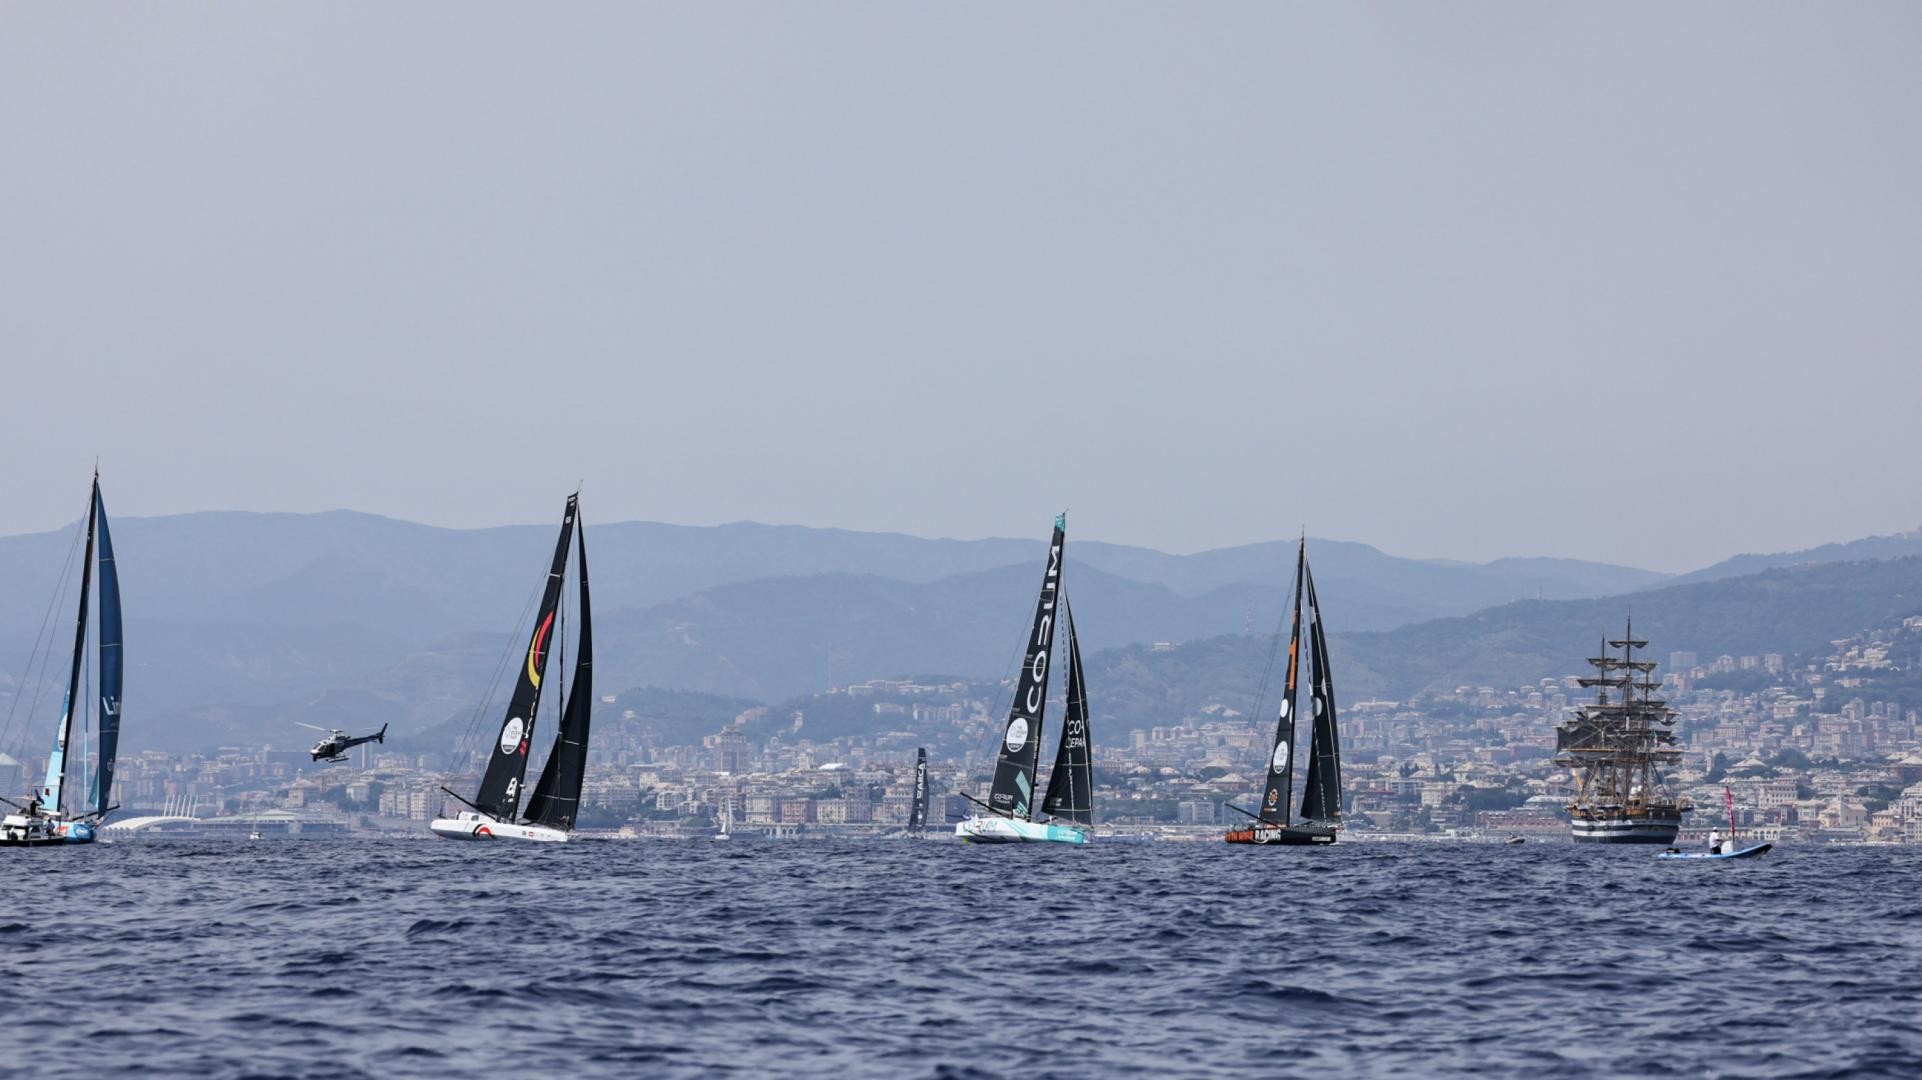 Genoa Coastal Race Win Secures 2nd Place at The Ocean Race Europe for 11th Hour Racing Team